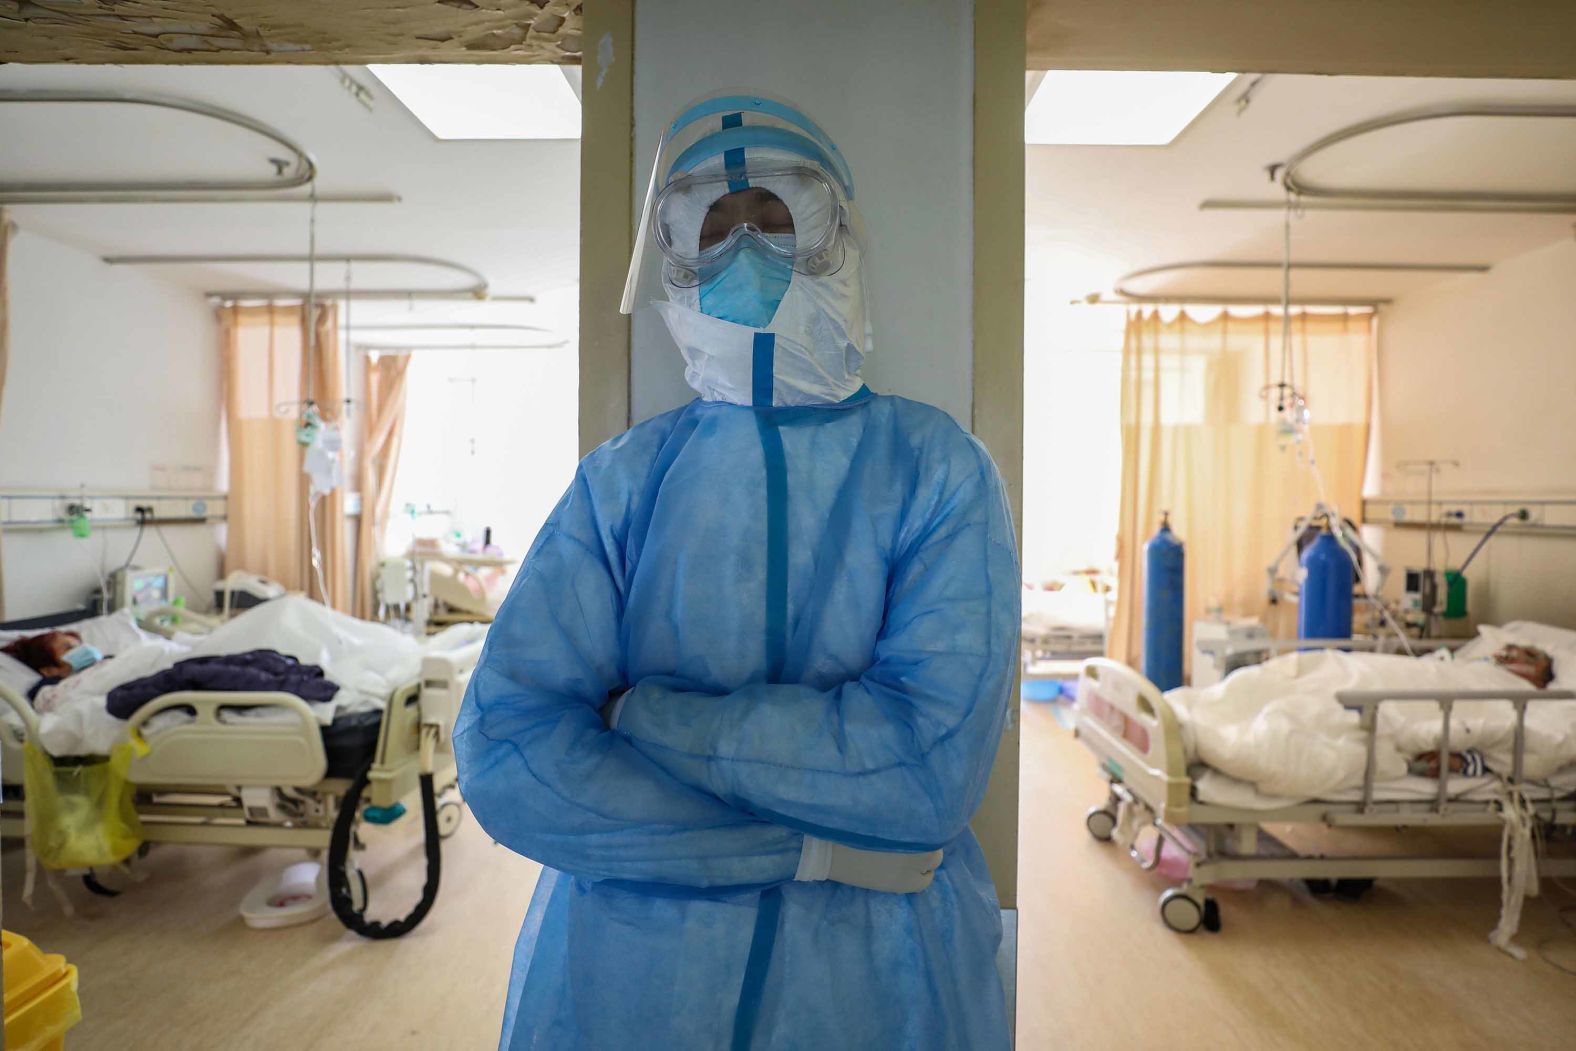 A medical worker rests at the isolation ward of the Red Cross hospital in Wuhan on February 16, 2020.